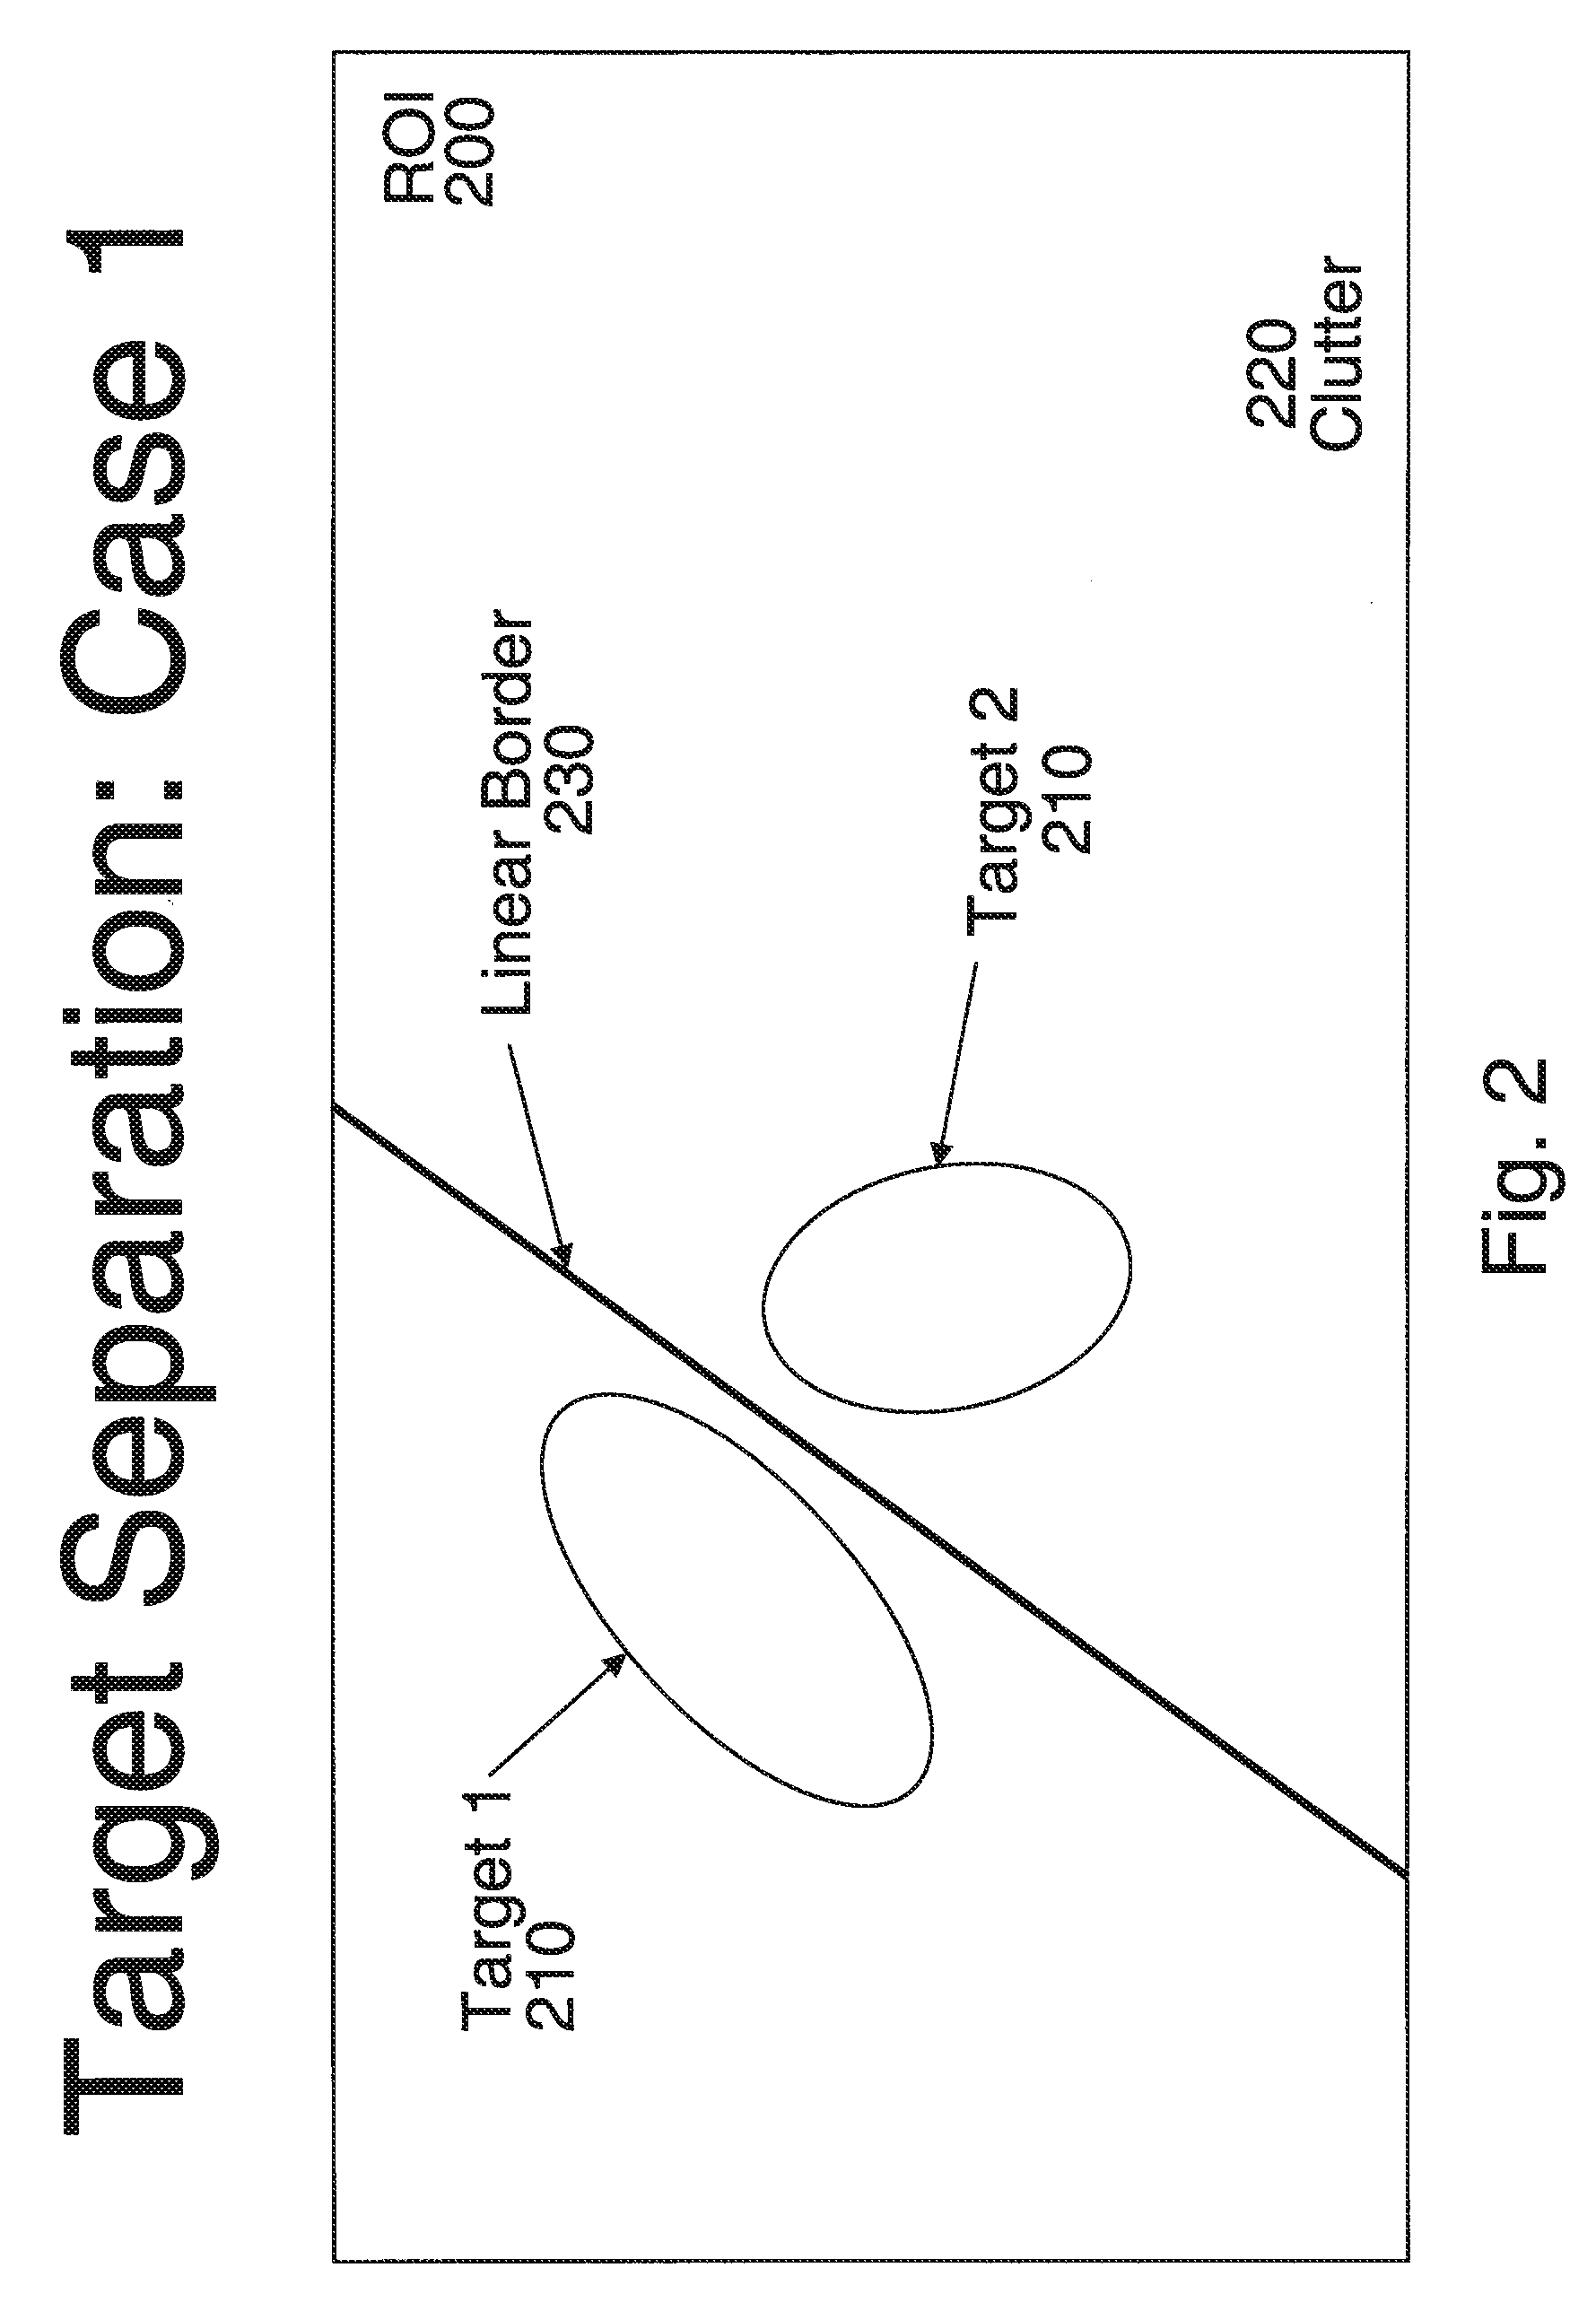 System and method for target separation of closely spaced targets in automatic target recognition